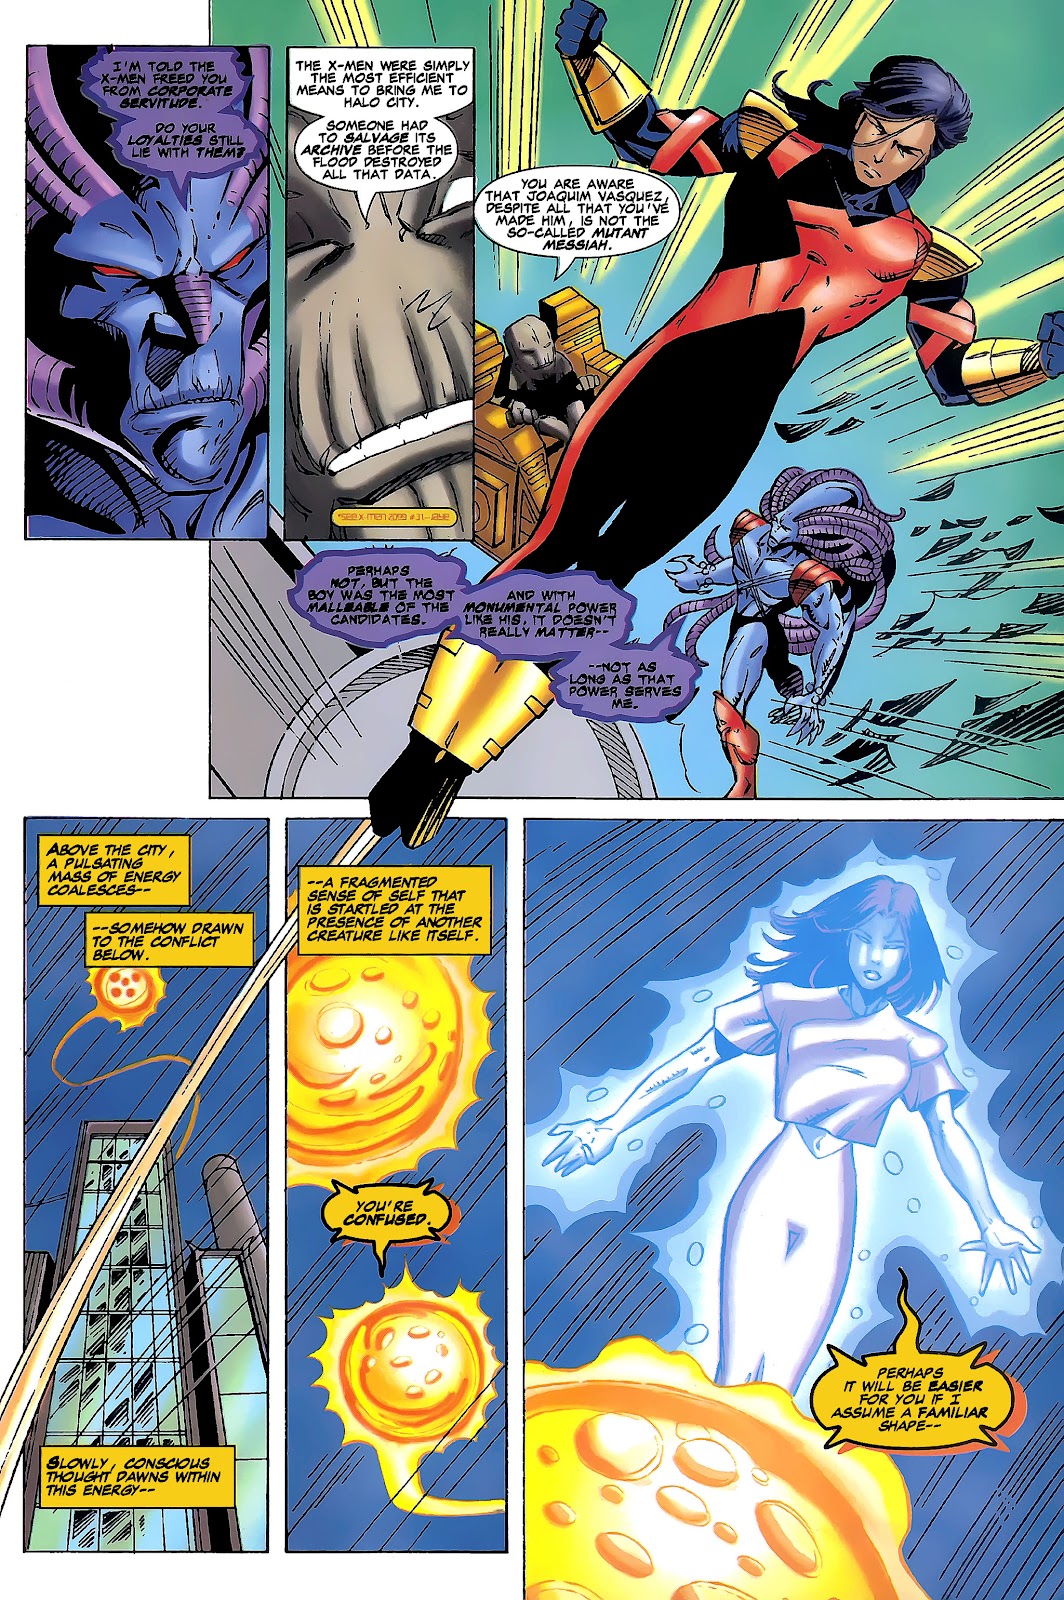 X-Men 2099 issue 35 - Page 7